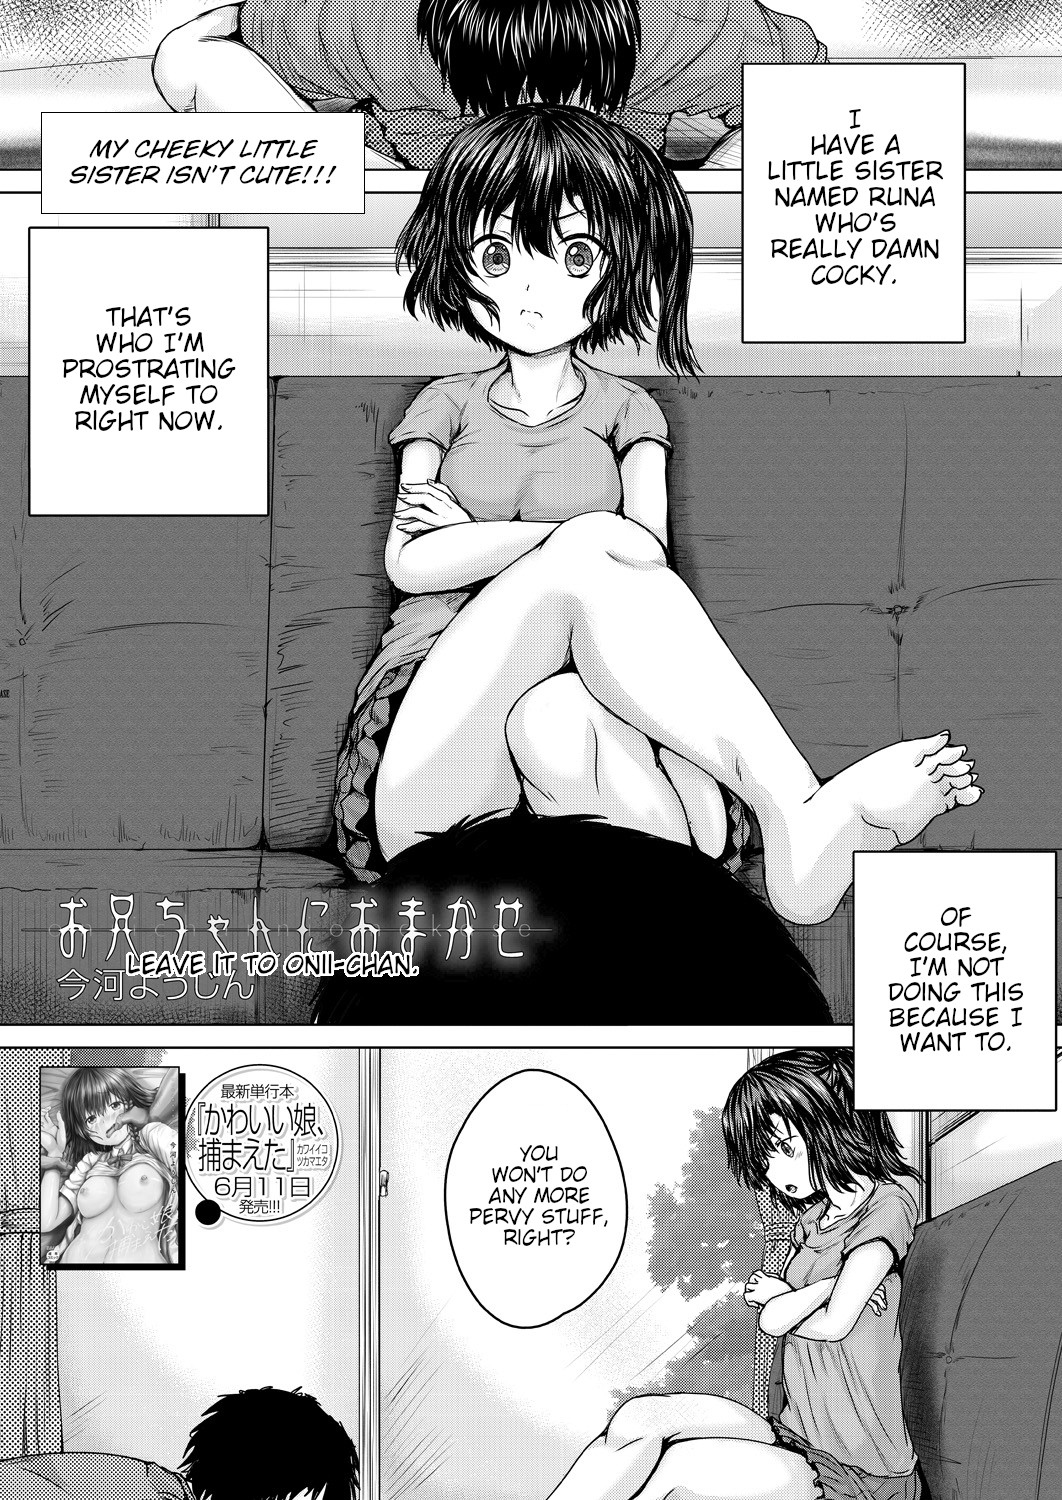 Hentai Manga Comic-Leave It To Onii-chan-Chapter 1-4-1